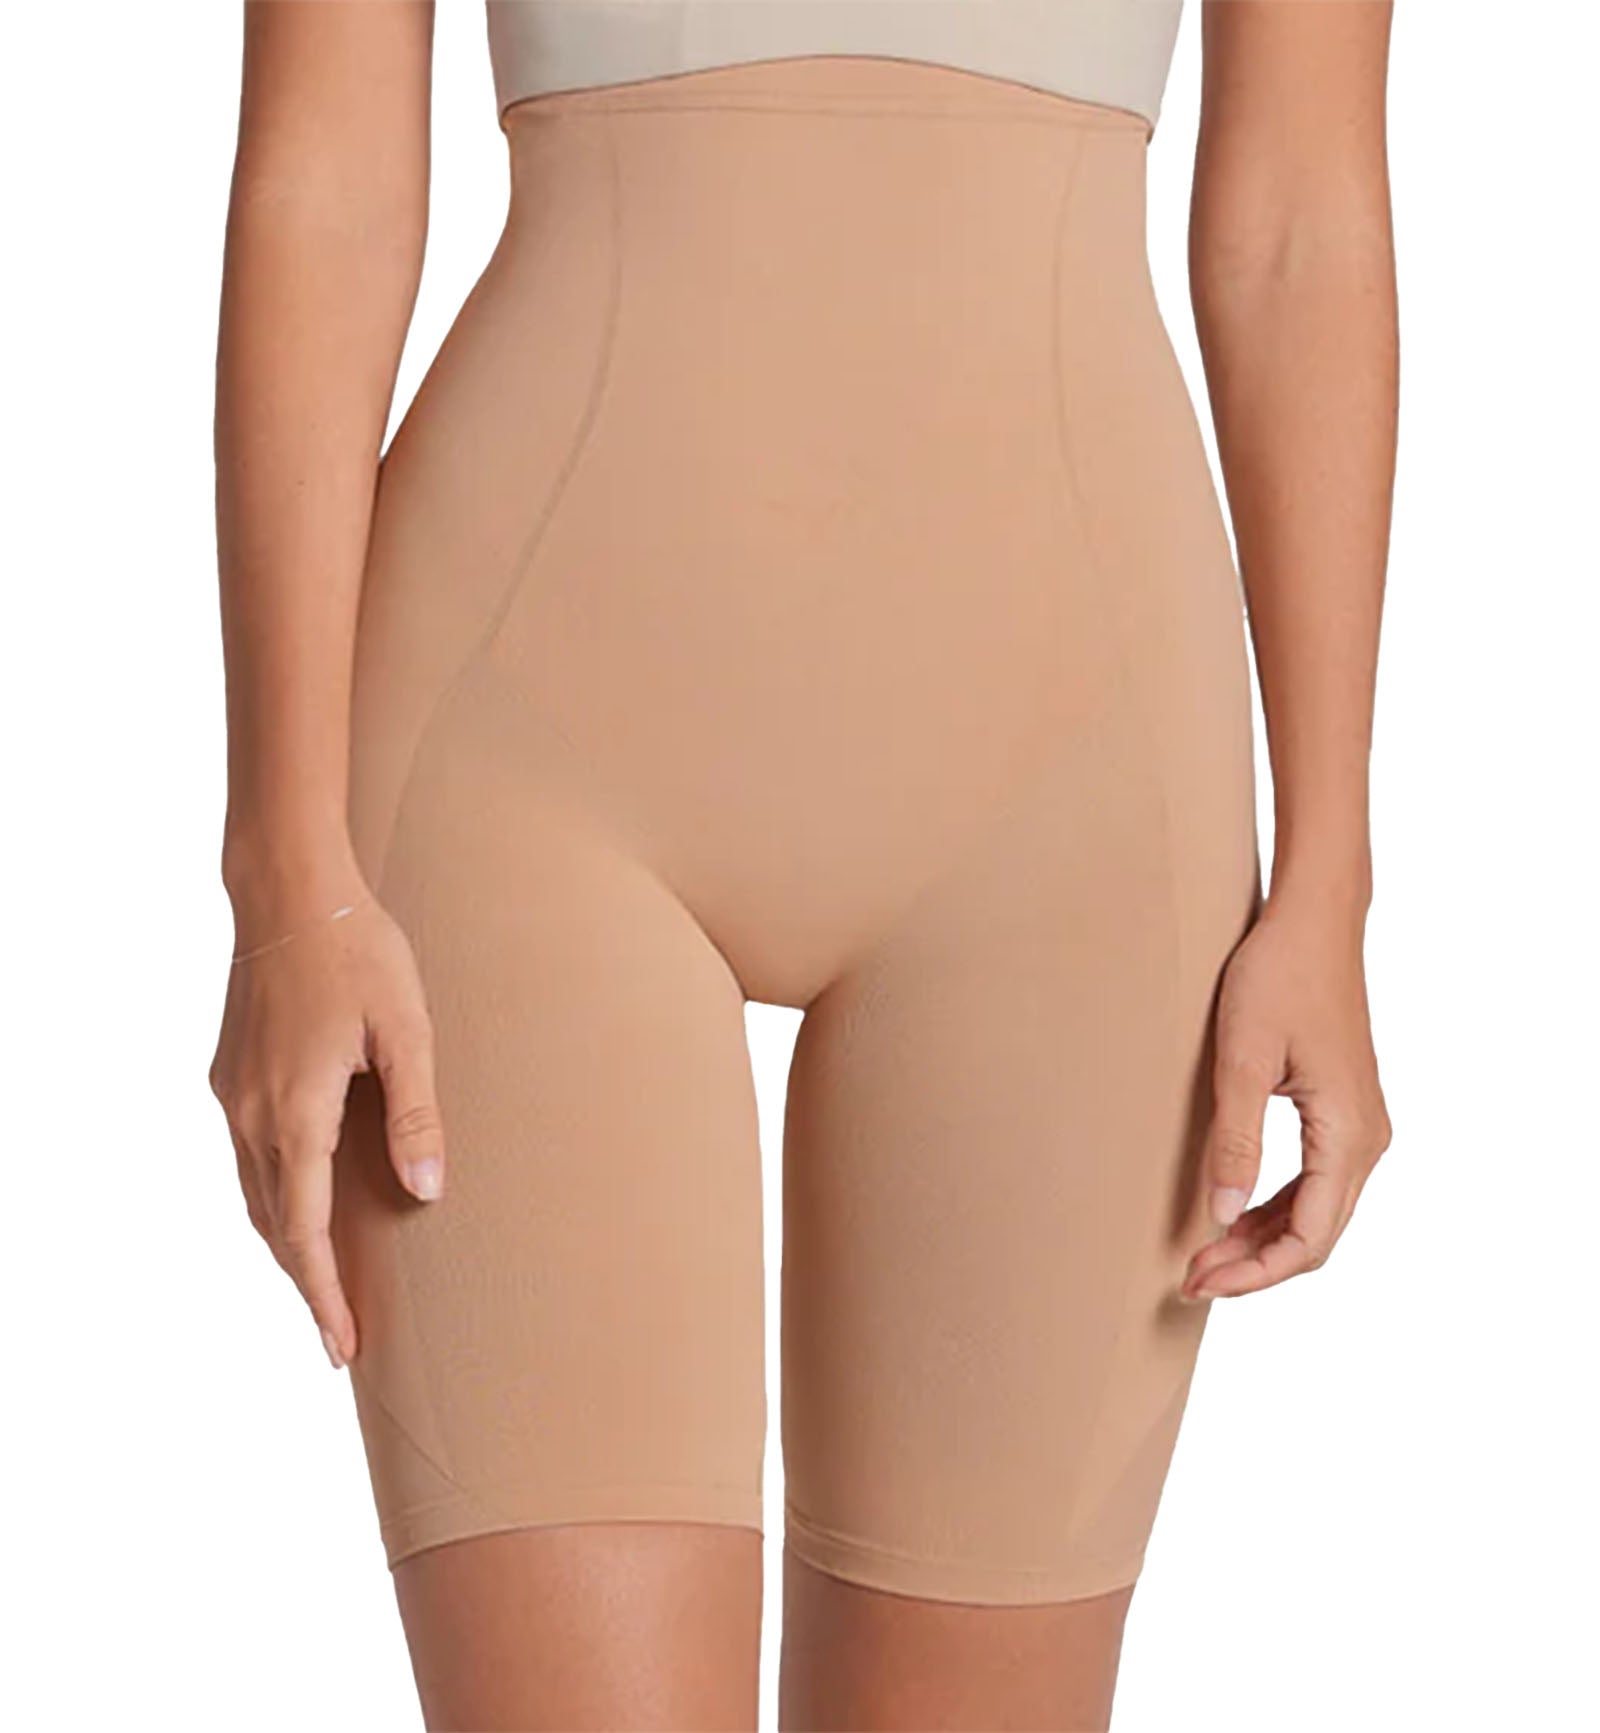 Leonisa Invisible Extra High-Waisted Shaper Short (012807M),XS/S,Natural - Natural,XS/S